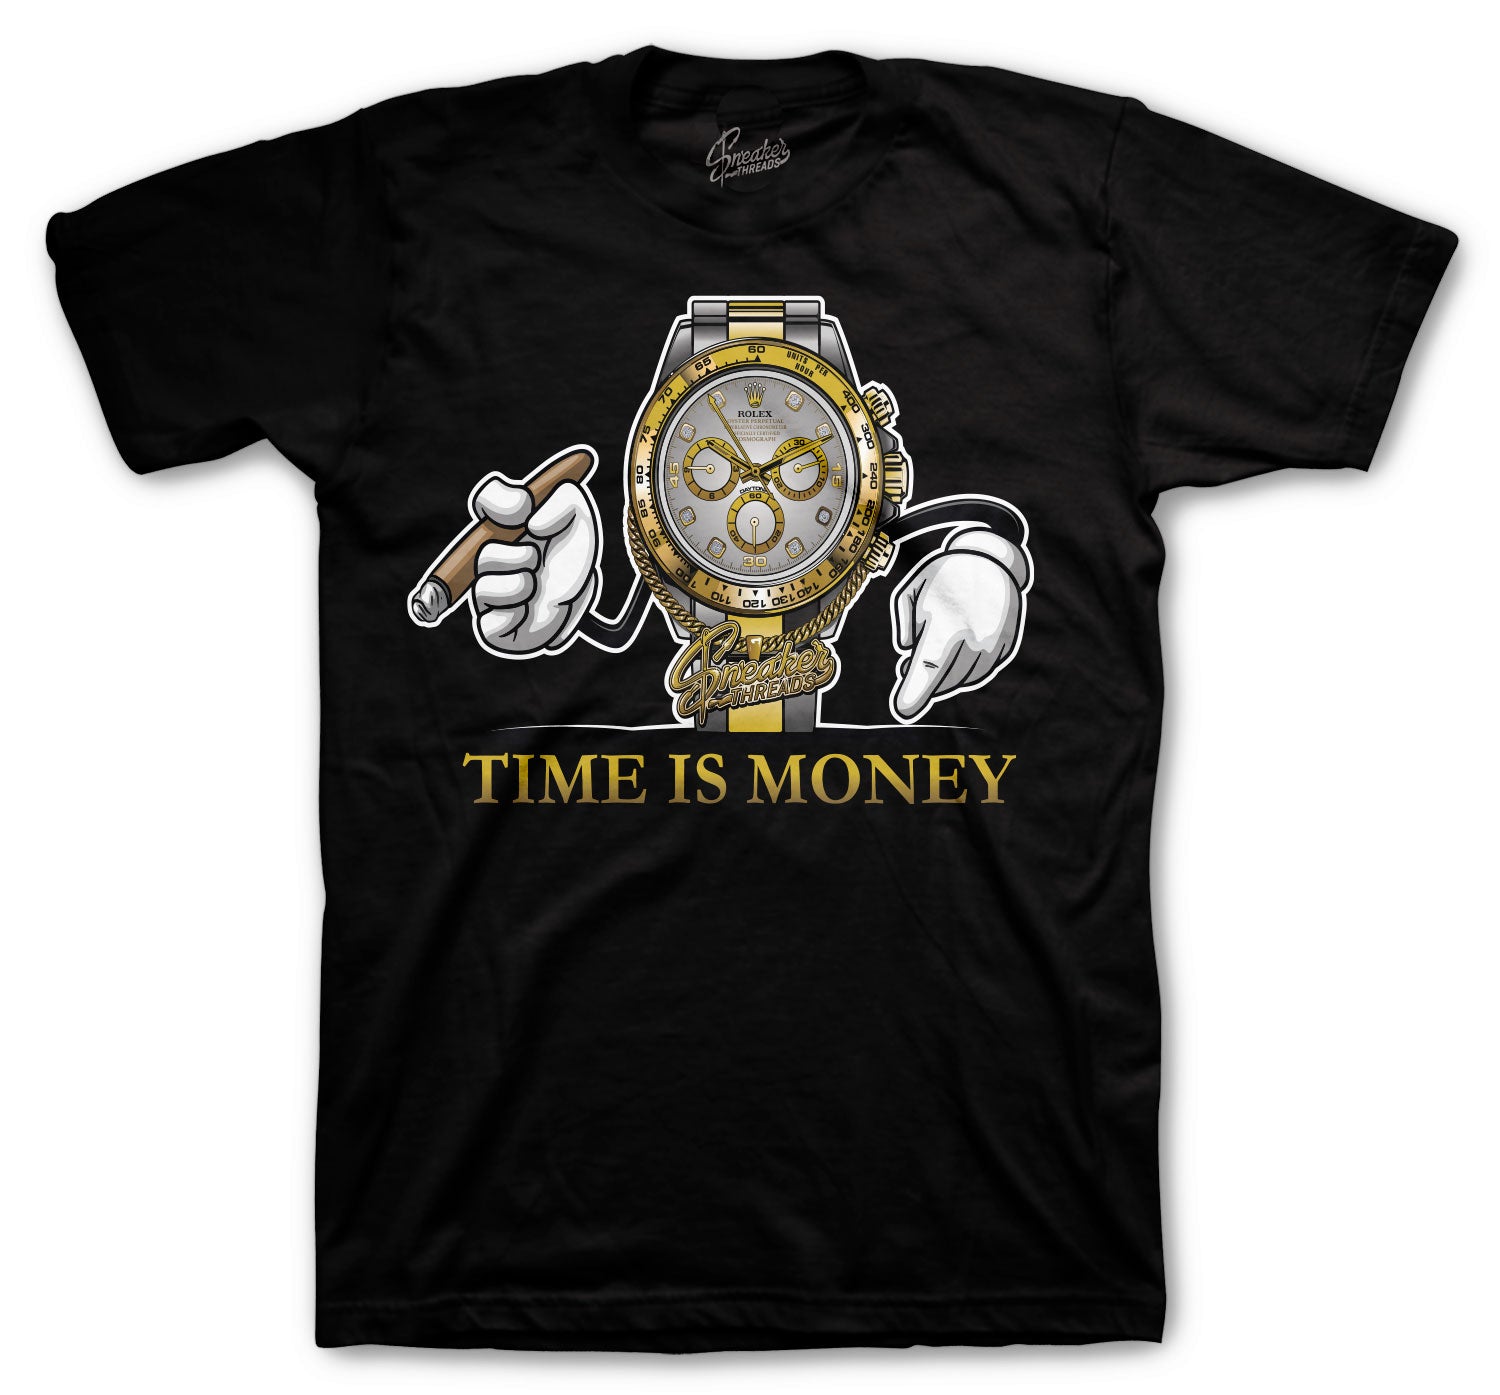 Retro 12 Royalty Shirt - Time Is Money Tee